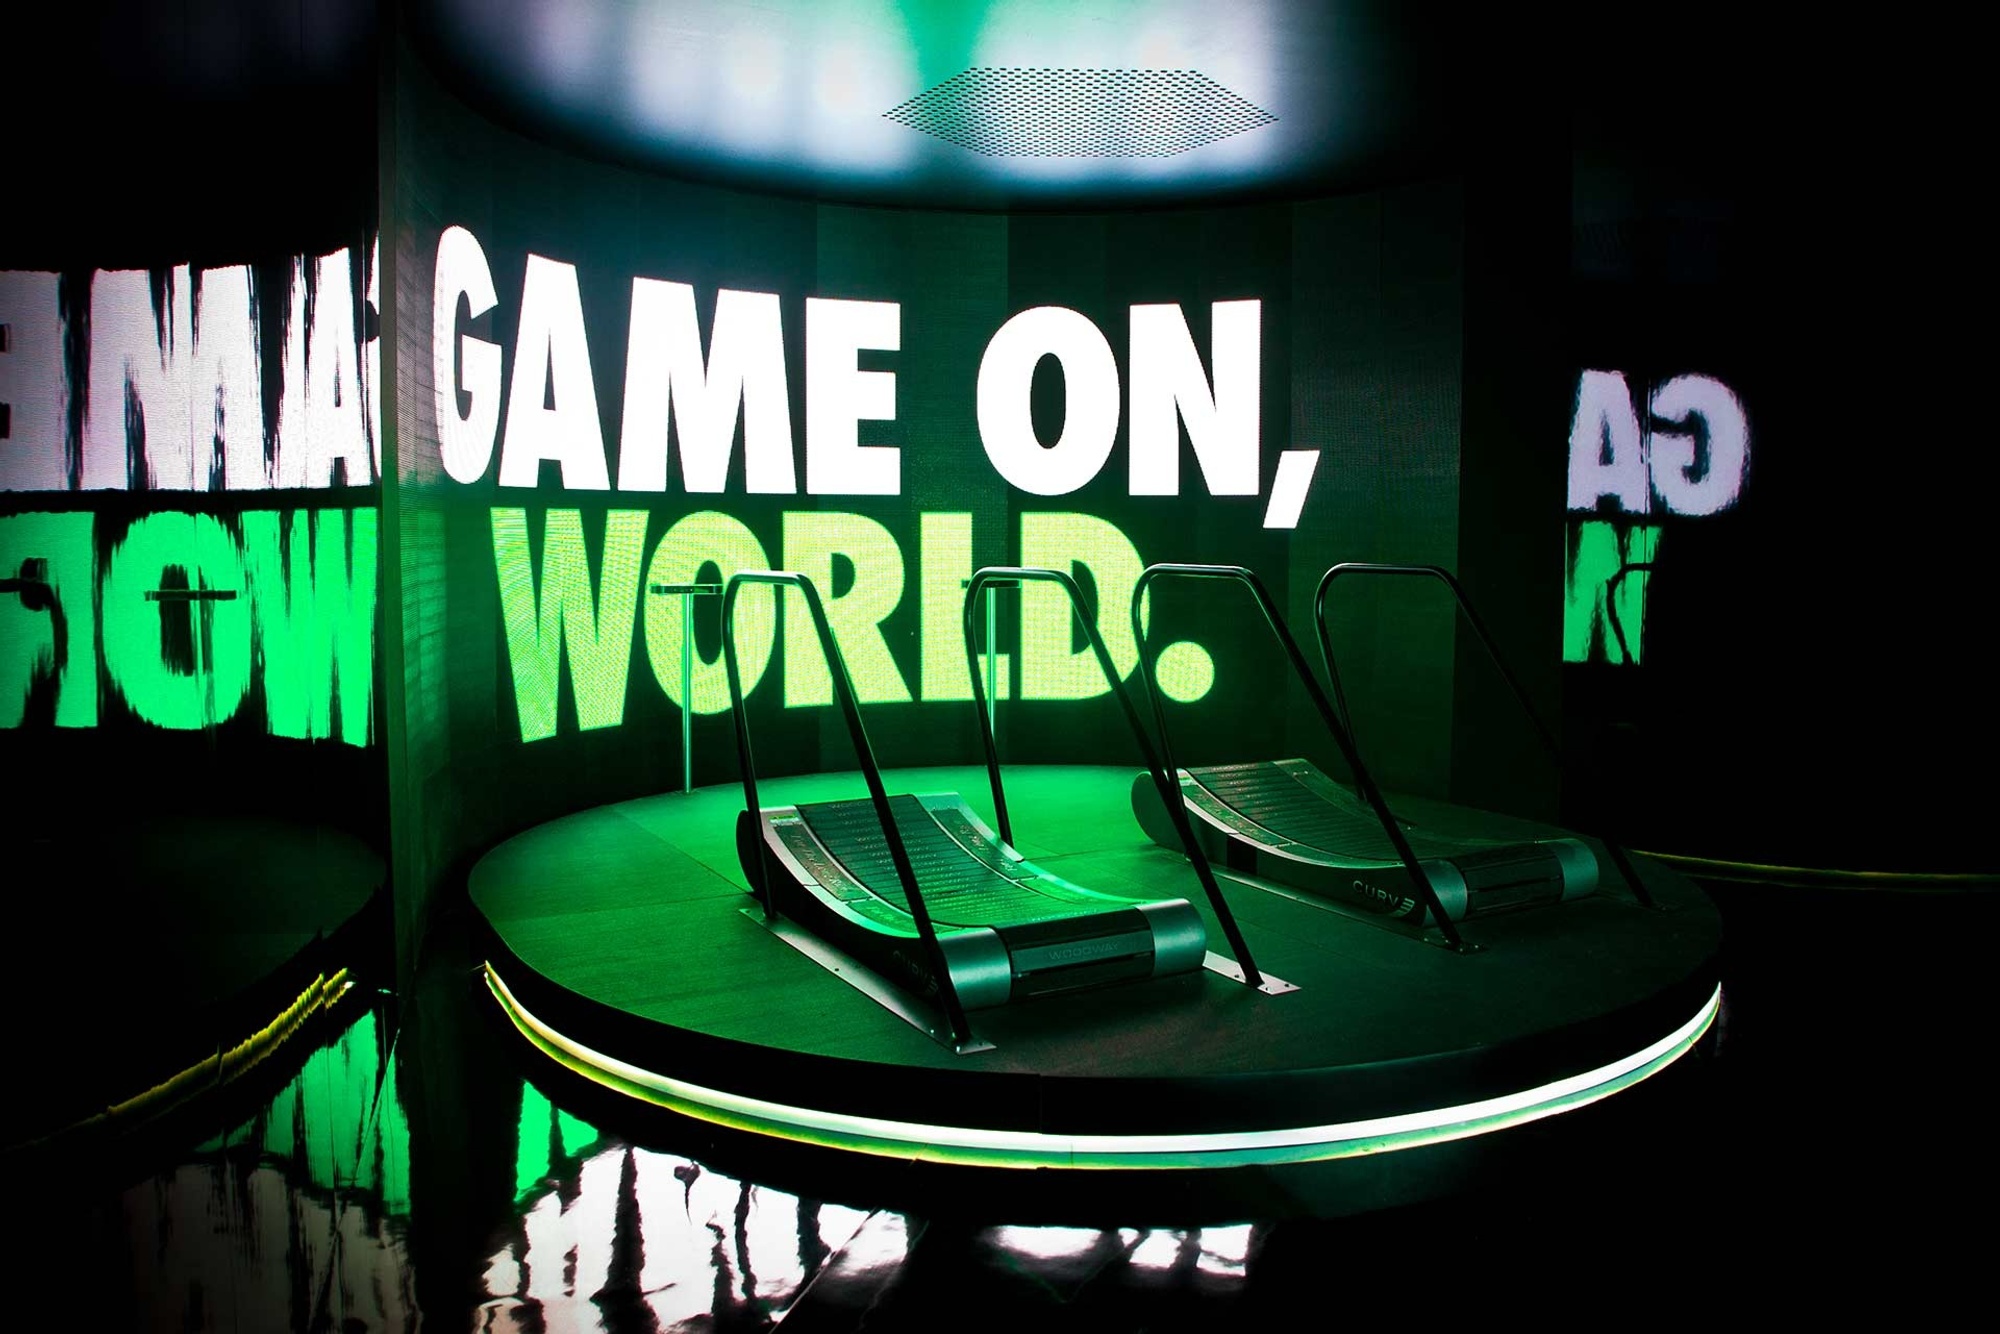 Two treadmills on a raised platform against a screen that says "Game on, world" and reflects neon green light onto the platform